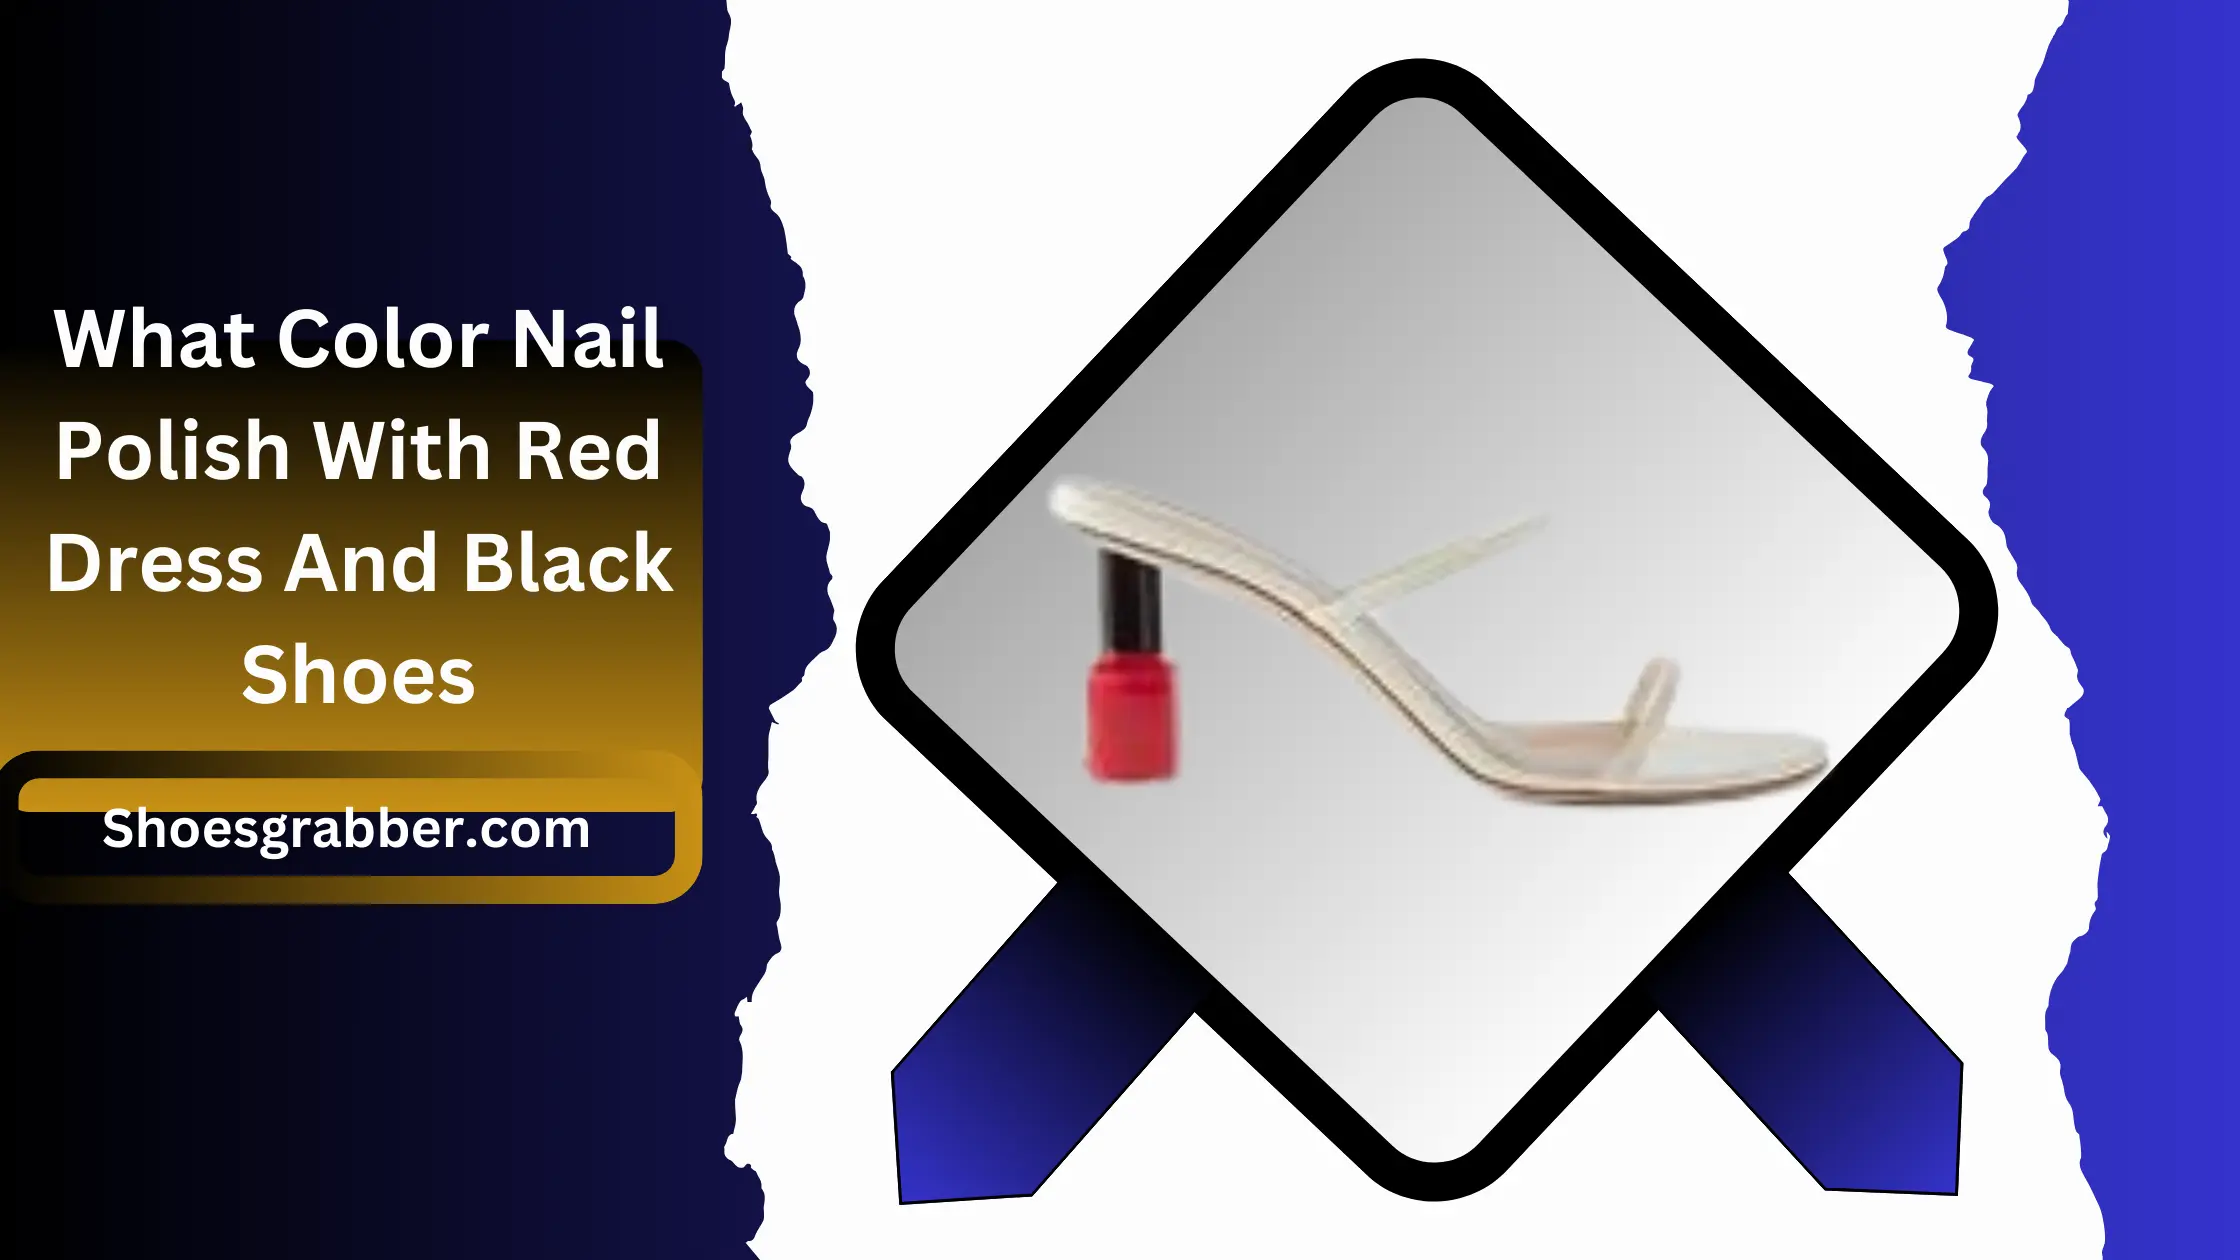 What Color Nail Polish With Red Dress And Black Shoes - Find the Perfect Balance